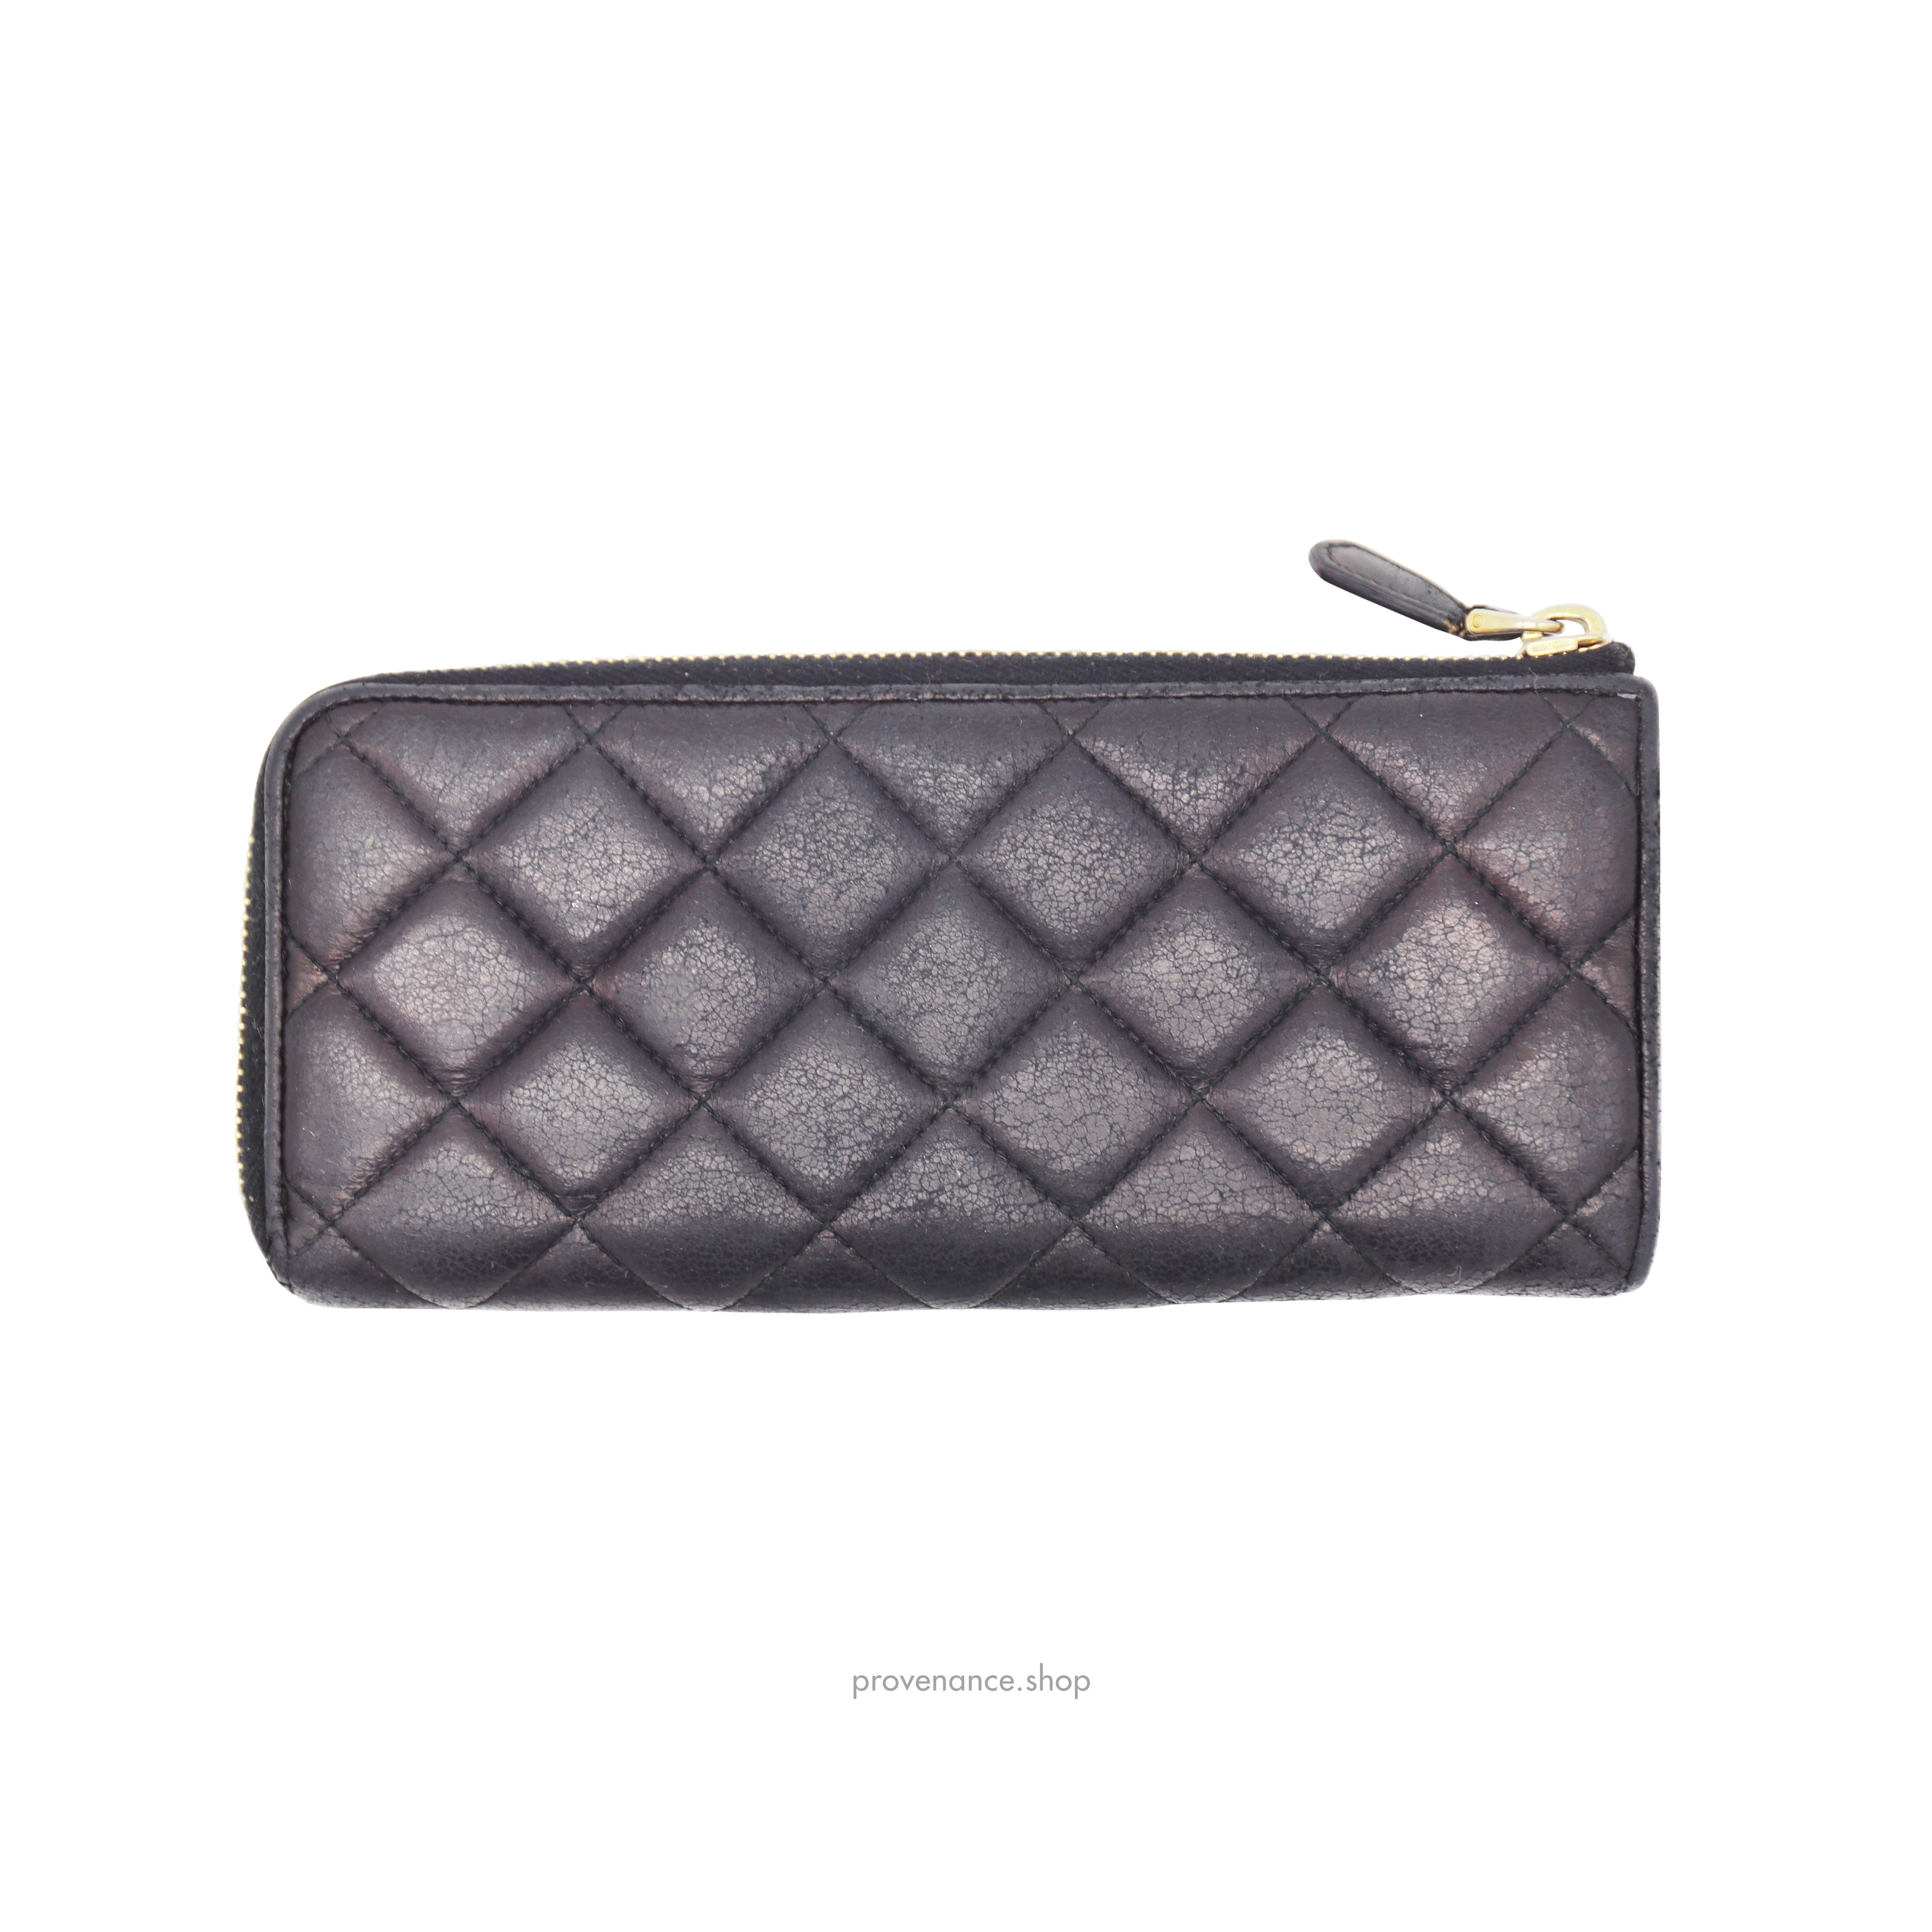 Prada Long Wallet - Quilted Black Calfskin Leather - 2